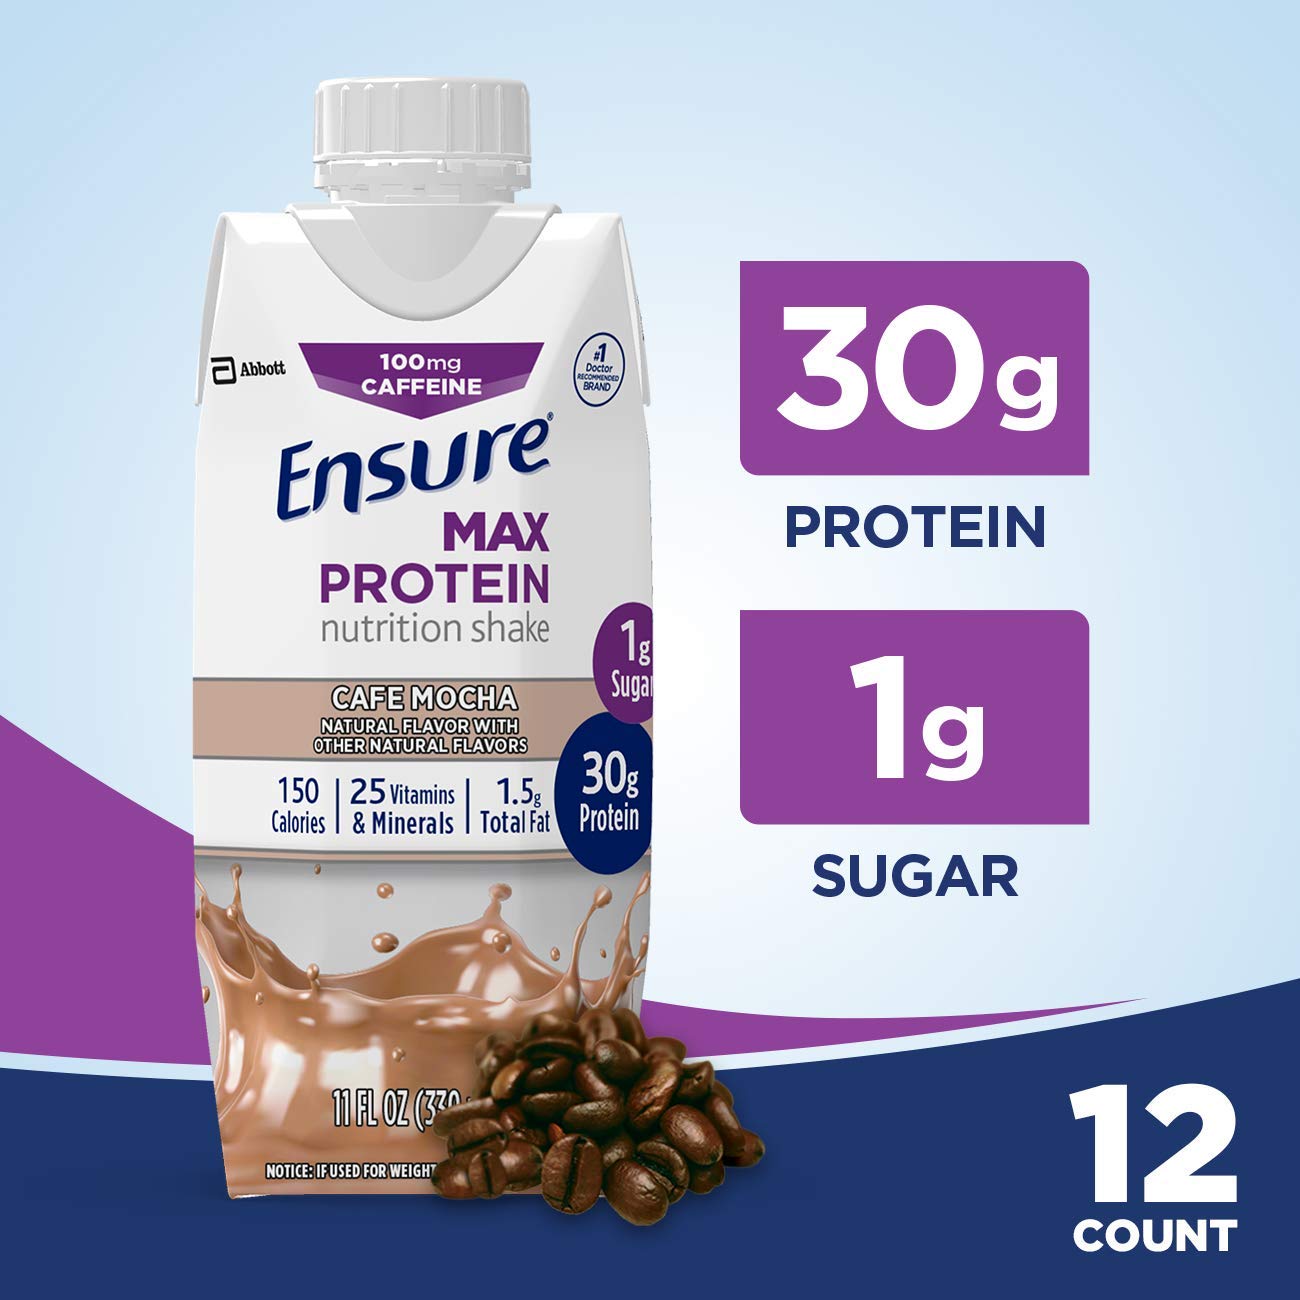 You are currently viewing Ensure Max Protein – Café Mocha Nutrition Shake